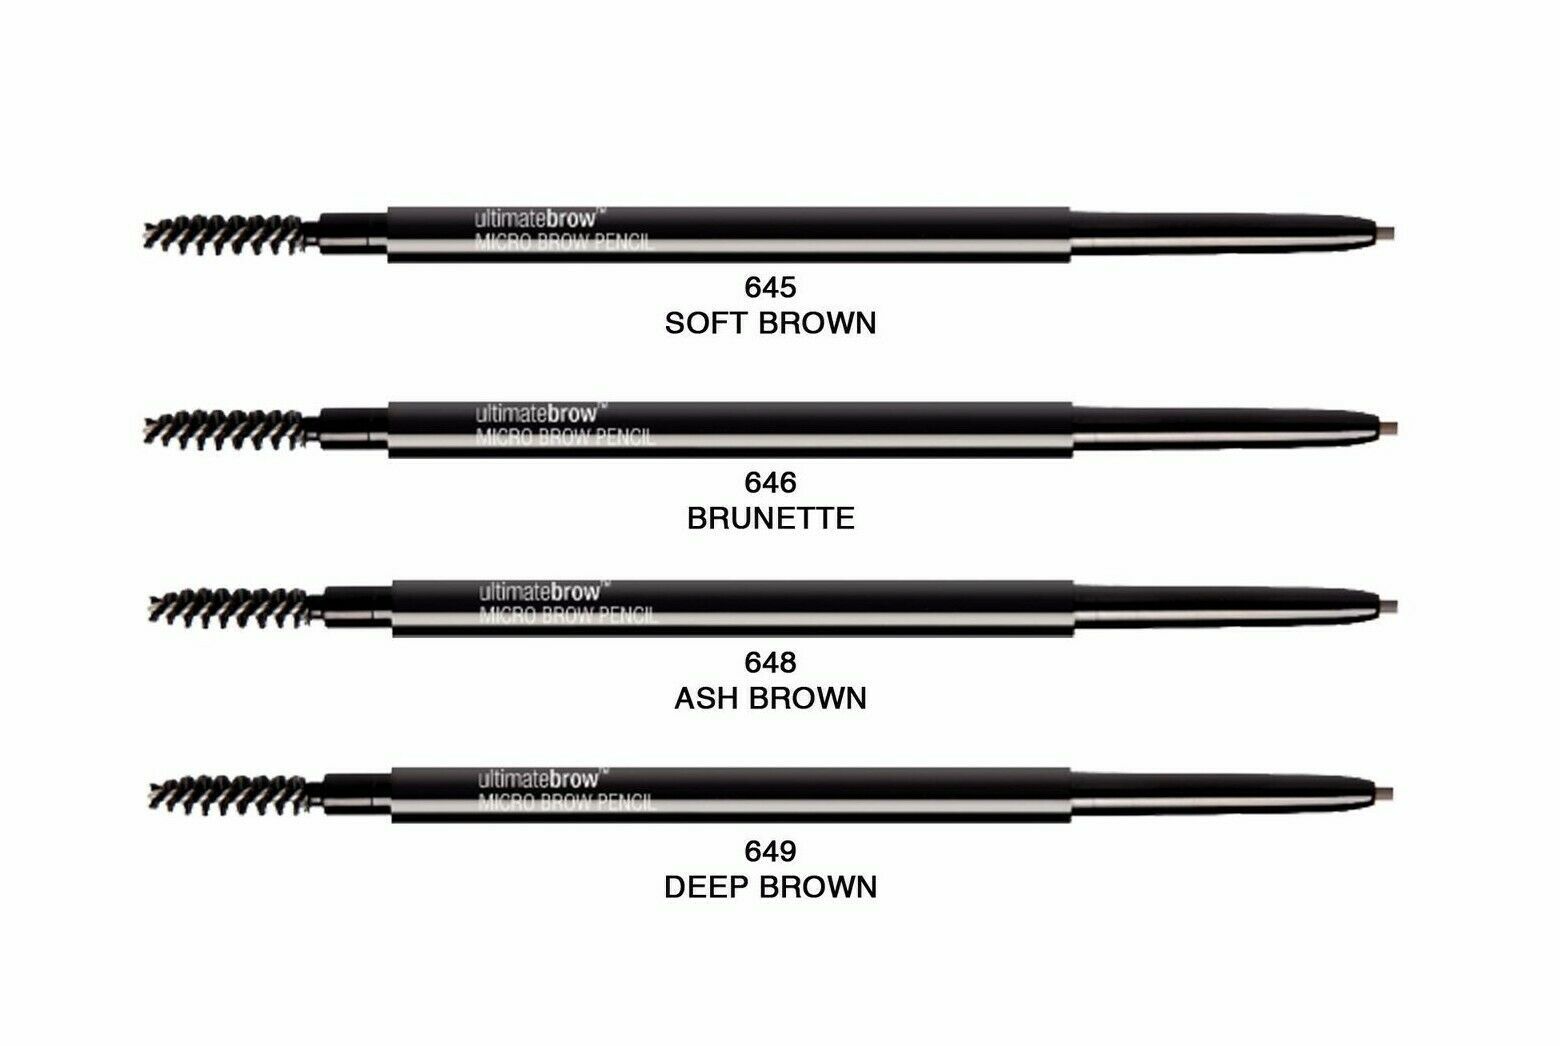 BUY 1 GET 1 AT 20% OFF (Add 2) Wet N Wild Ultimate Brow Micro Brow Pencil